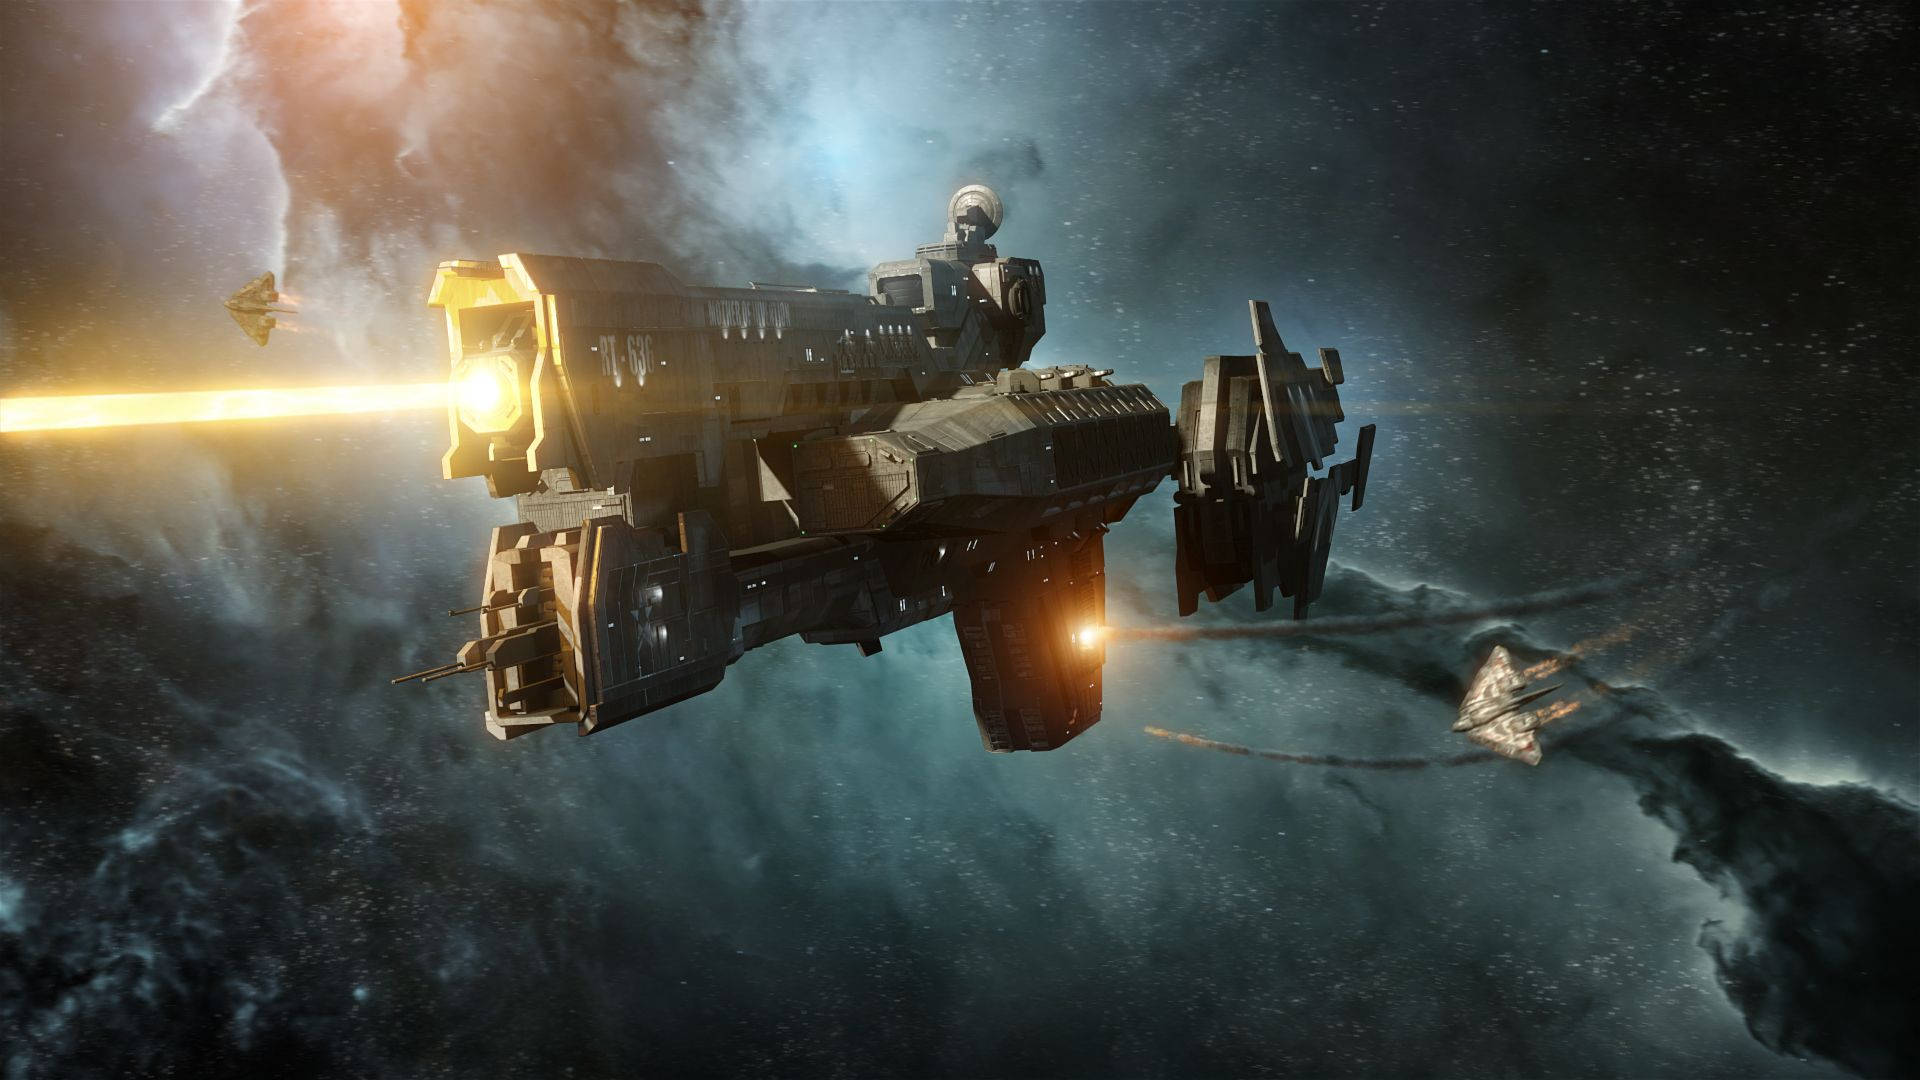 A Halo-branded Weapon in Space Wallpaper